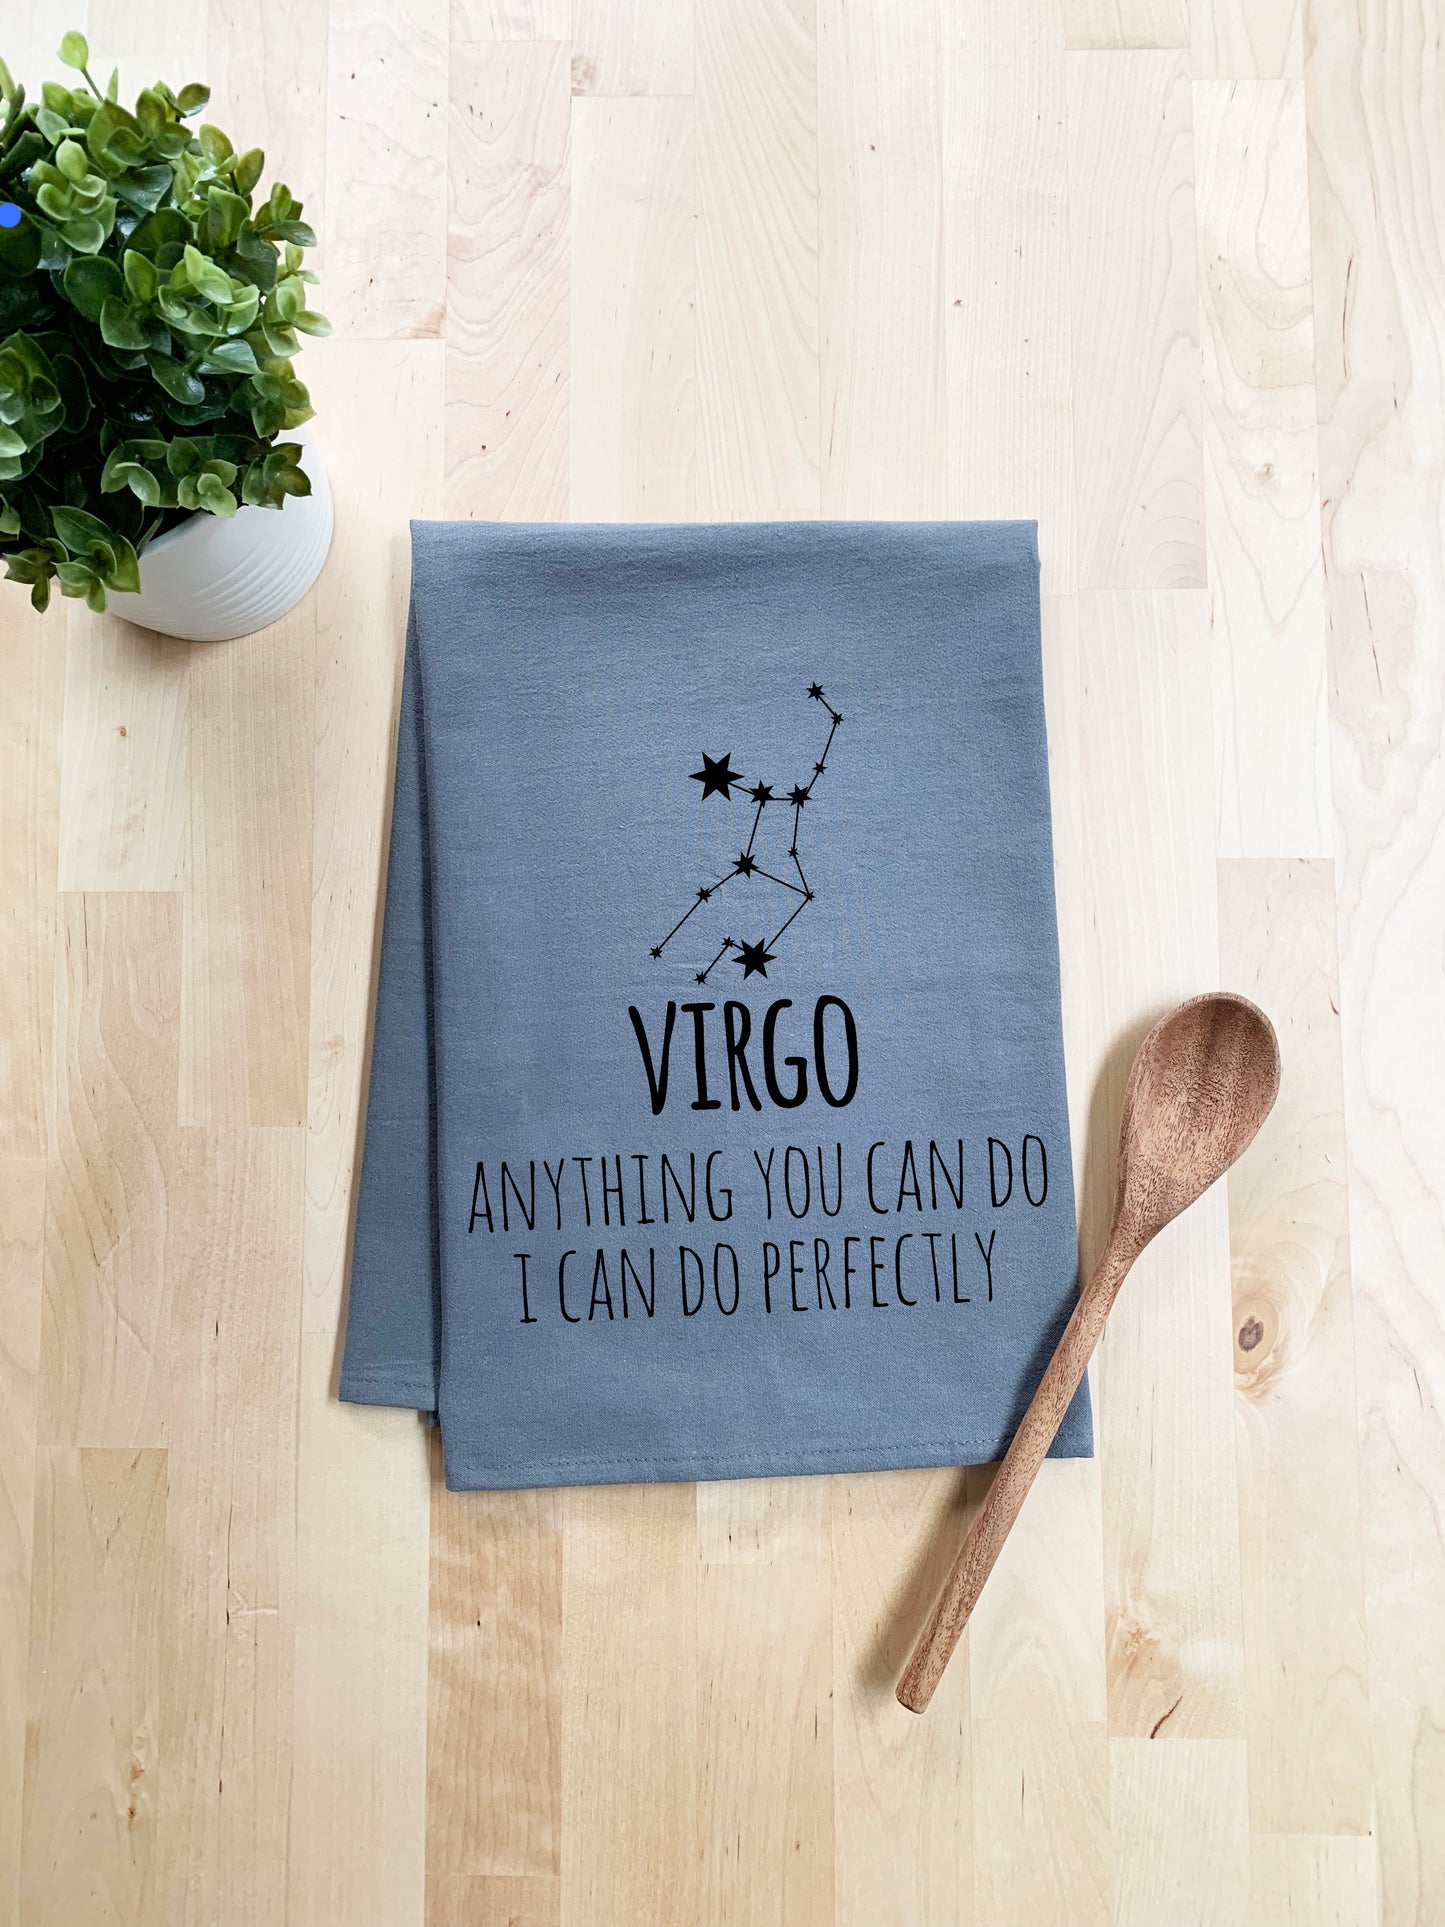 Virgo Zodiac (Anything You Can Do I Can Do Perfectly) Dish Towel - White Or Gray - MoonlightMakers